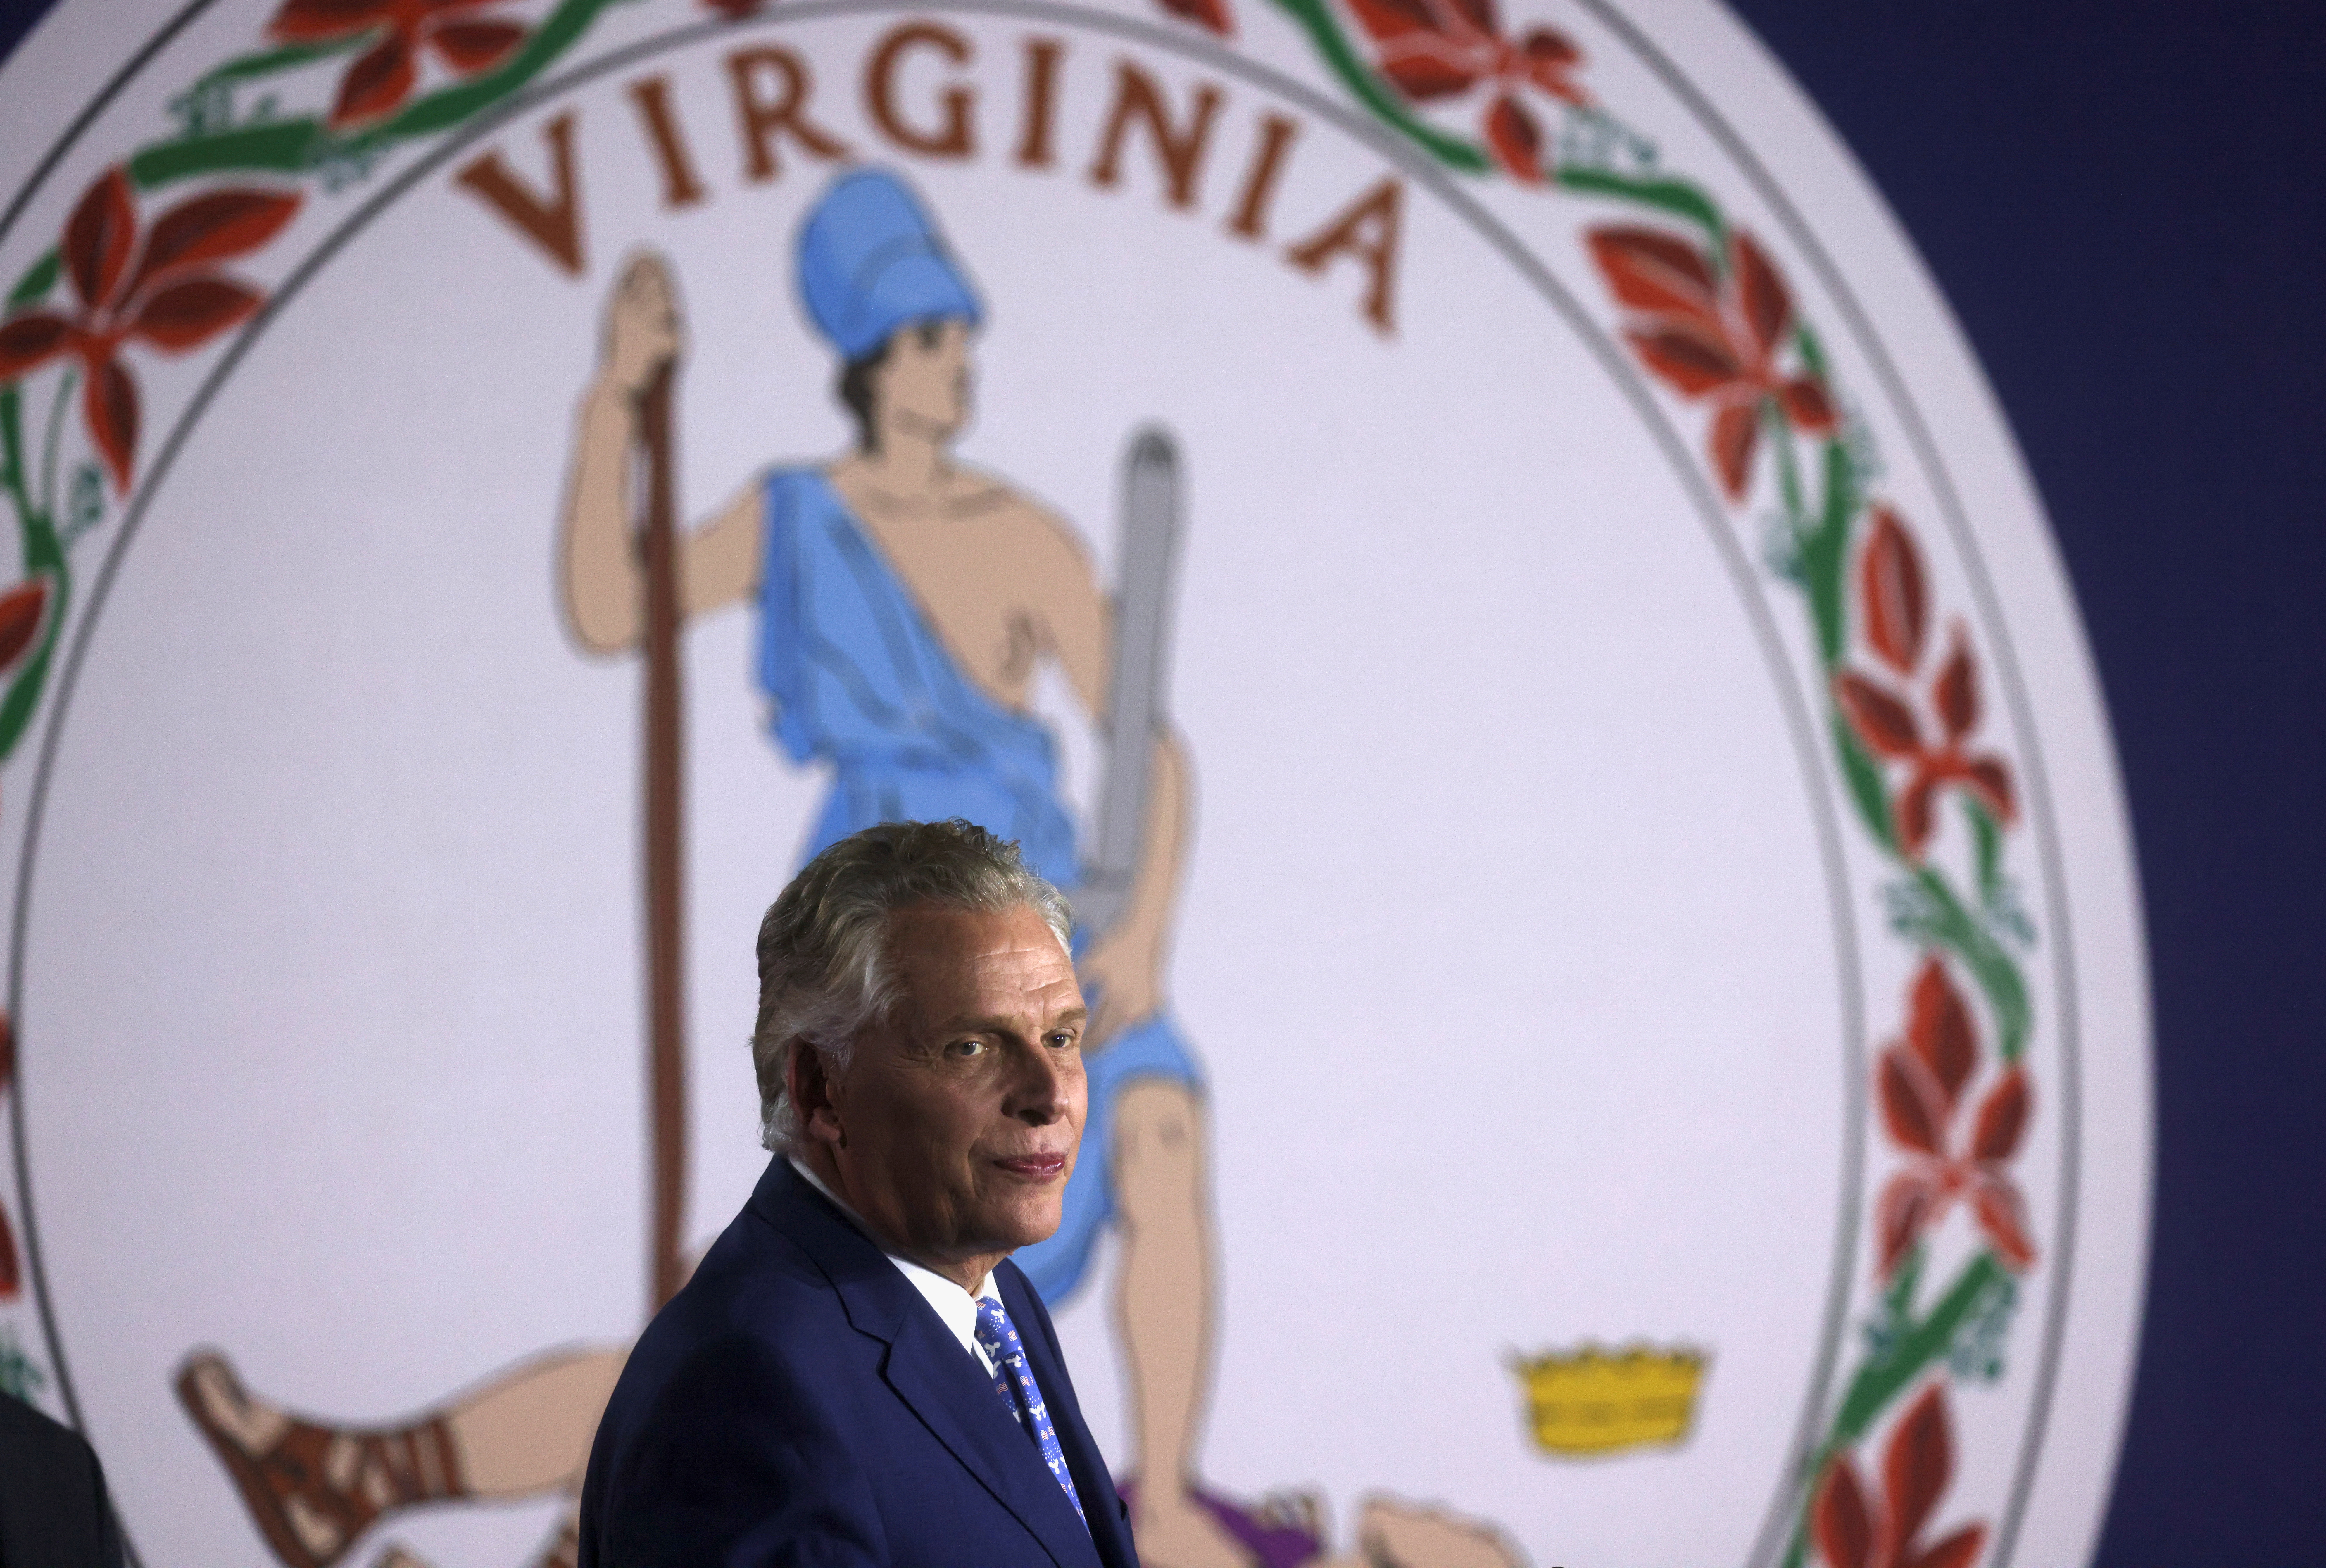 Democrat Terry McAuliffe holds election night event in race for Virginia governor